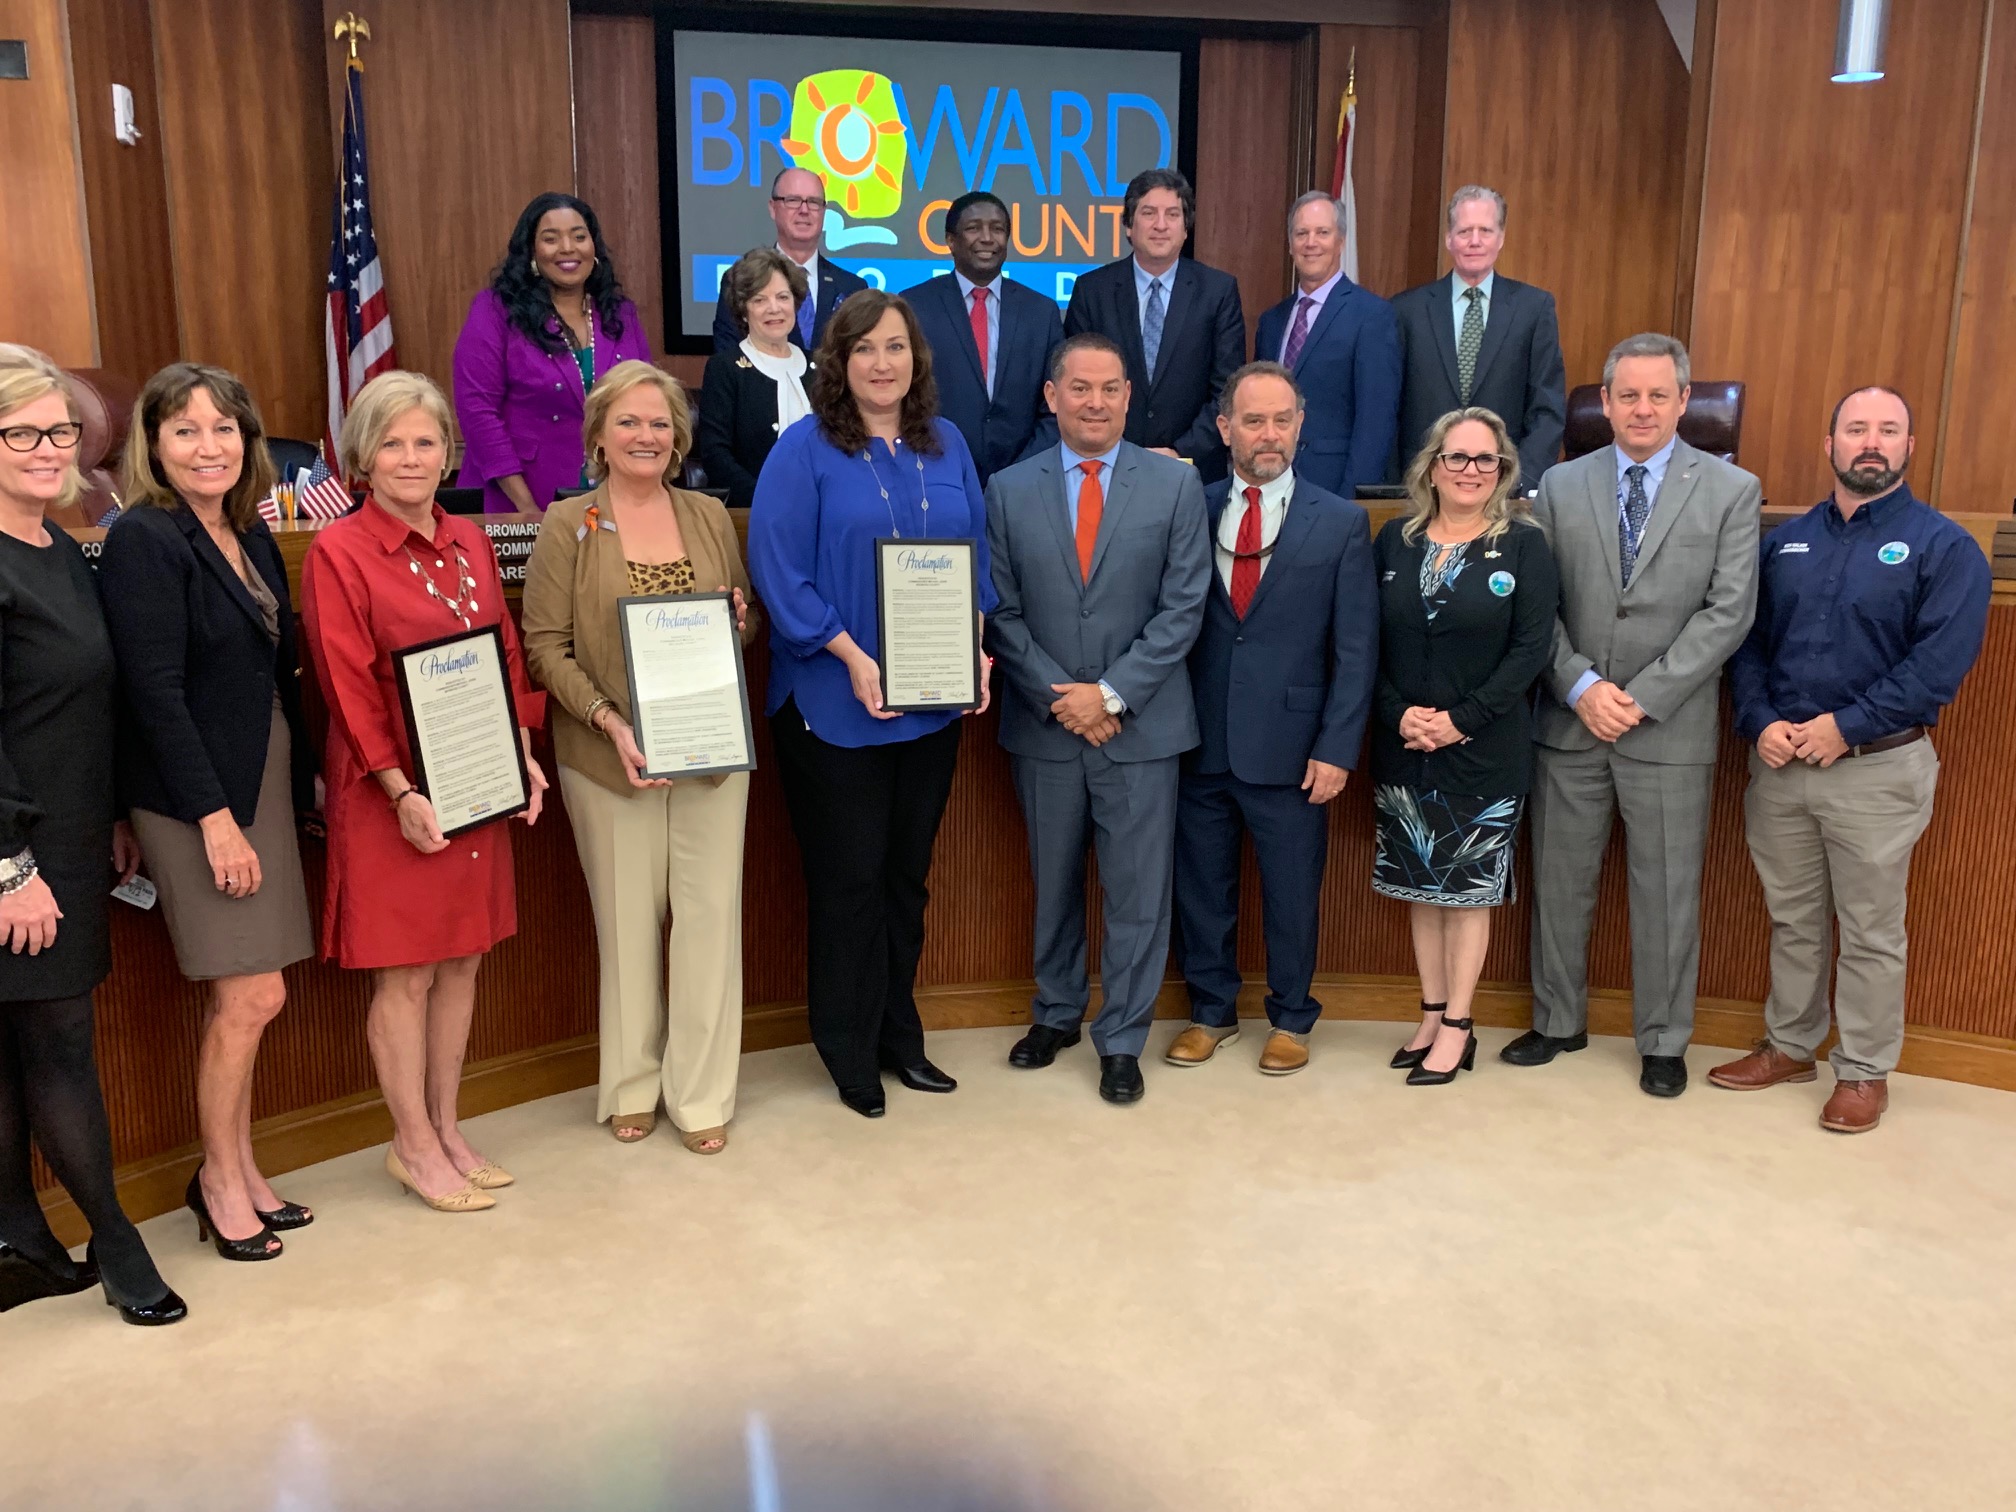 Coral Springs Museum of Art, City of Coral Springs, City of Parkland Appreciation Day proclaimed by Broward Commission on February 12, 2019. 